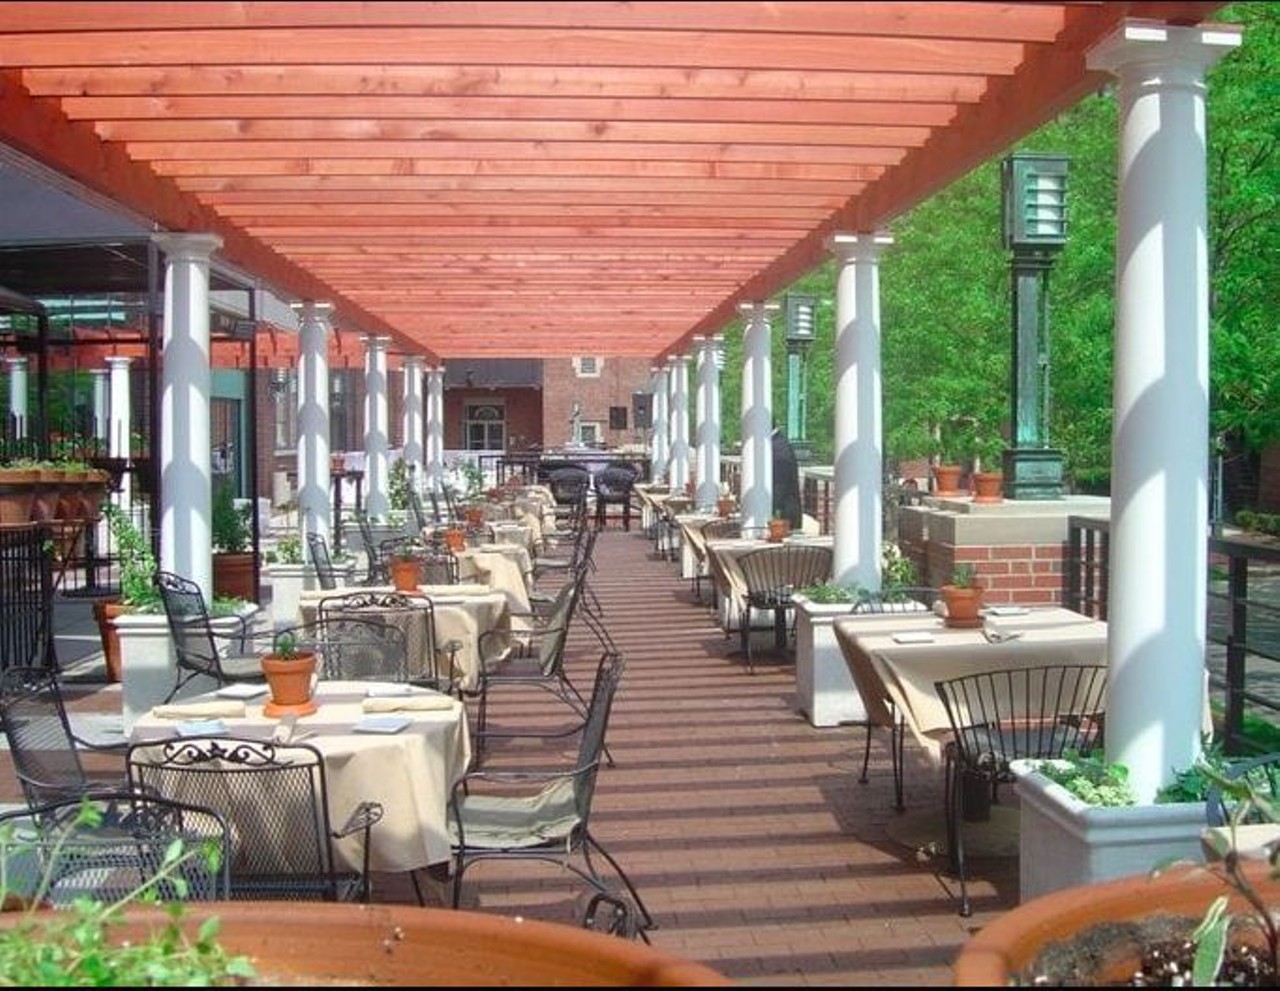 Rattlesnake Club
300 River Place Drive, Detroit
This premier dining experience is not one you want to miss out on. Enjoy lunch, dinner and even happy hour on the Garden Terrace with views of the RiverWalk, Detroit and Canadian skylines. 
Photo via The Rattlesnake Club Yelp